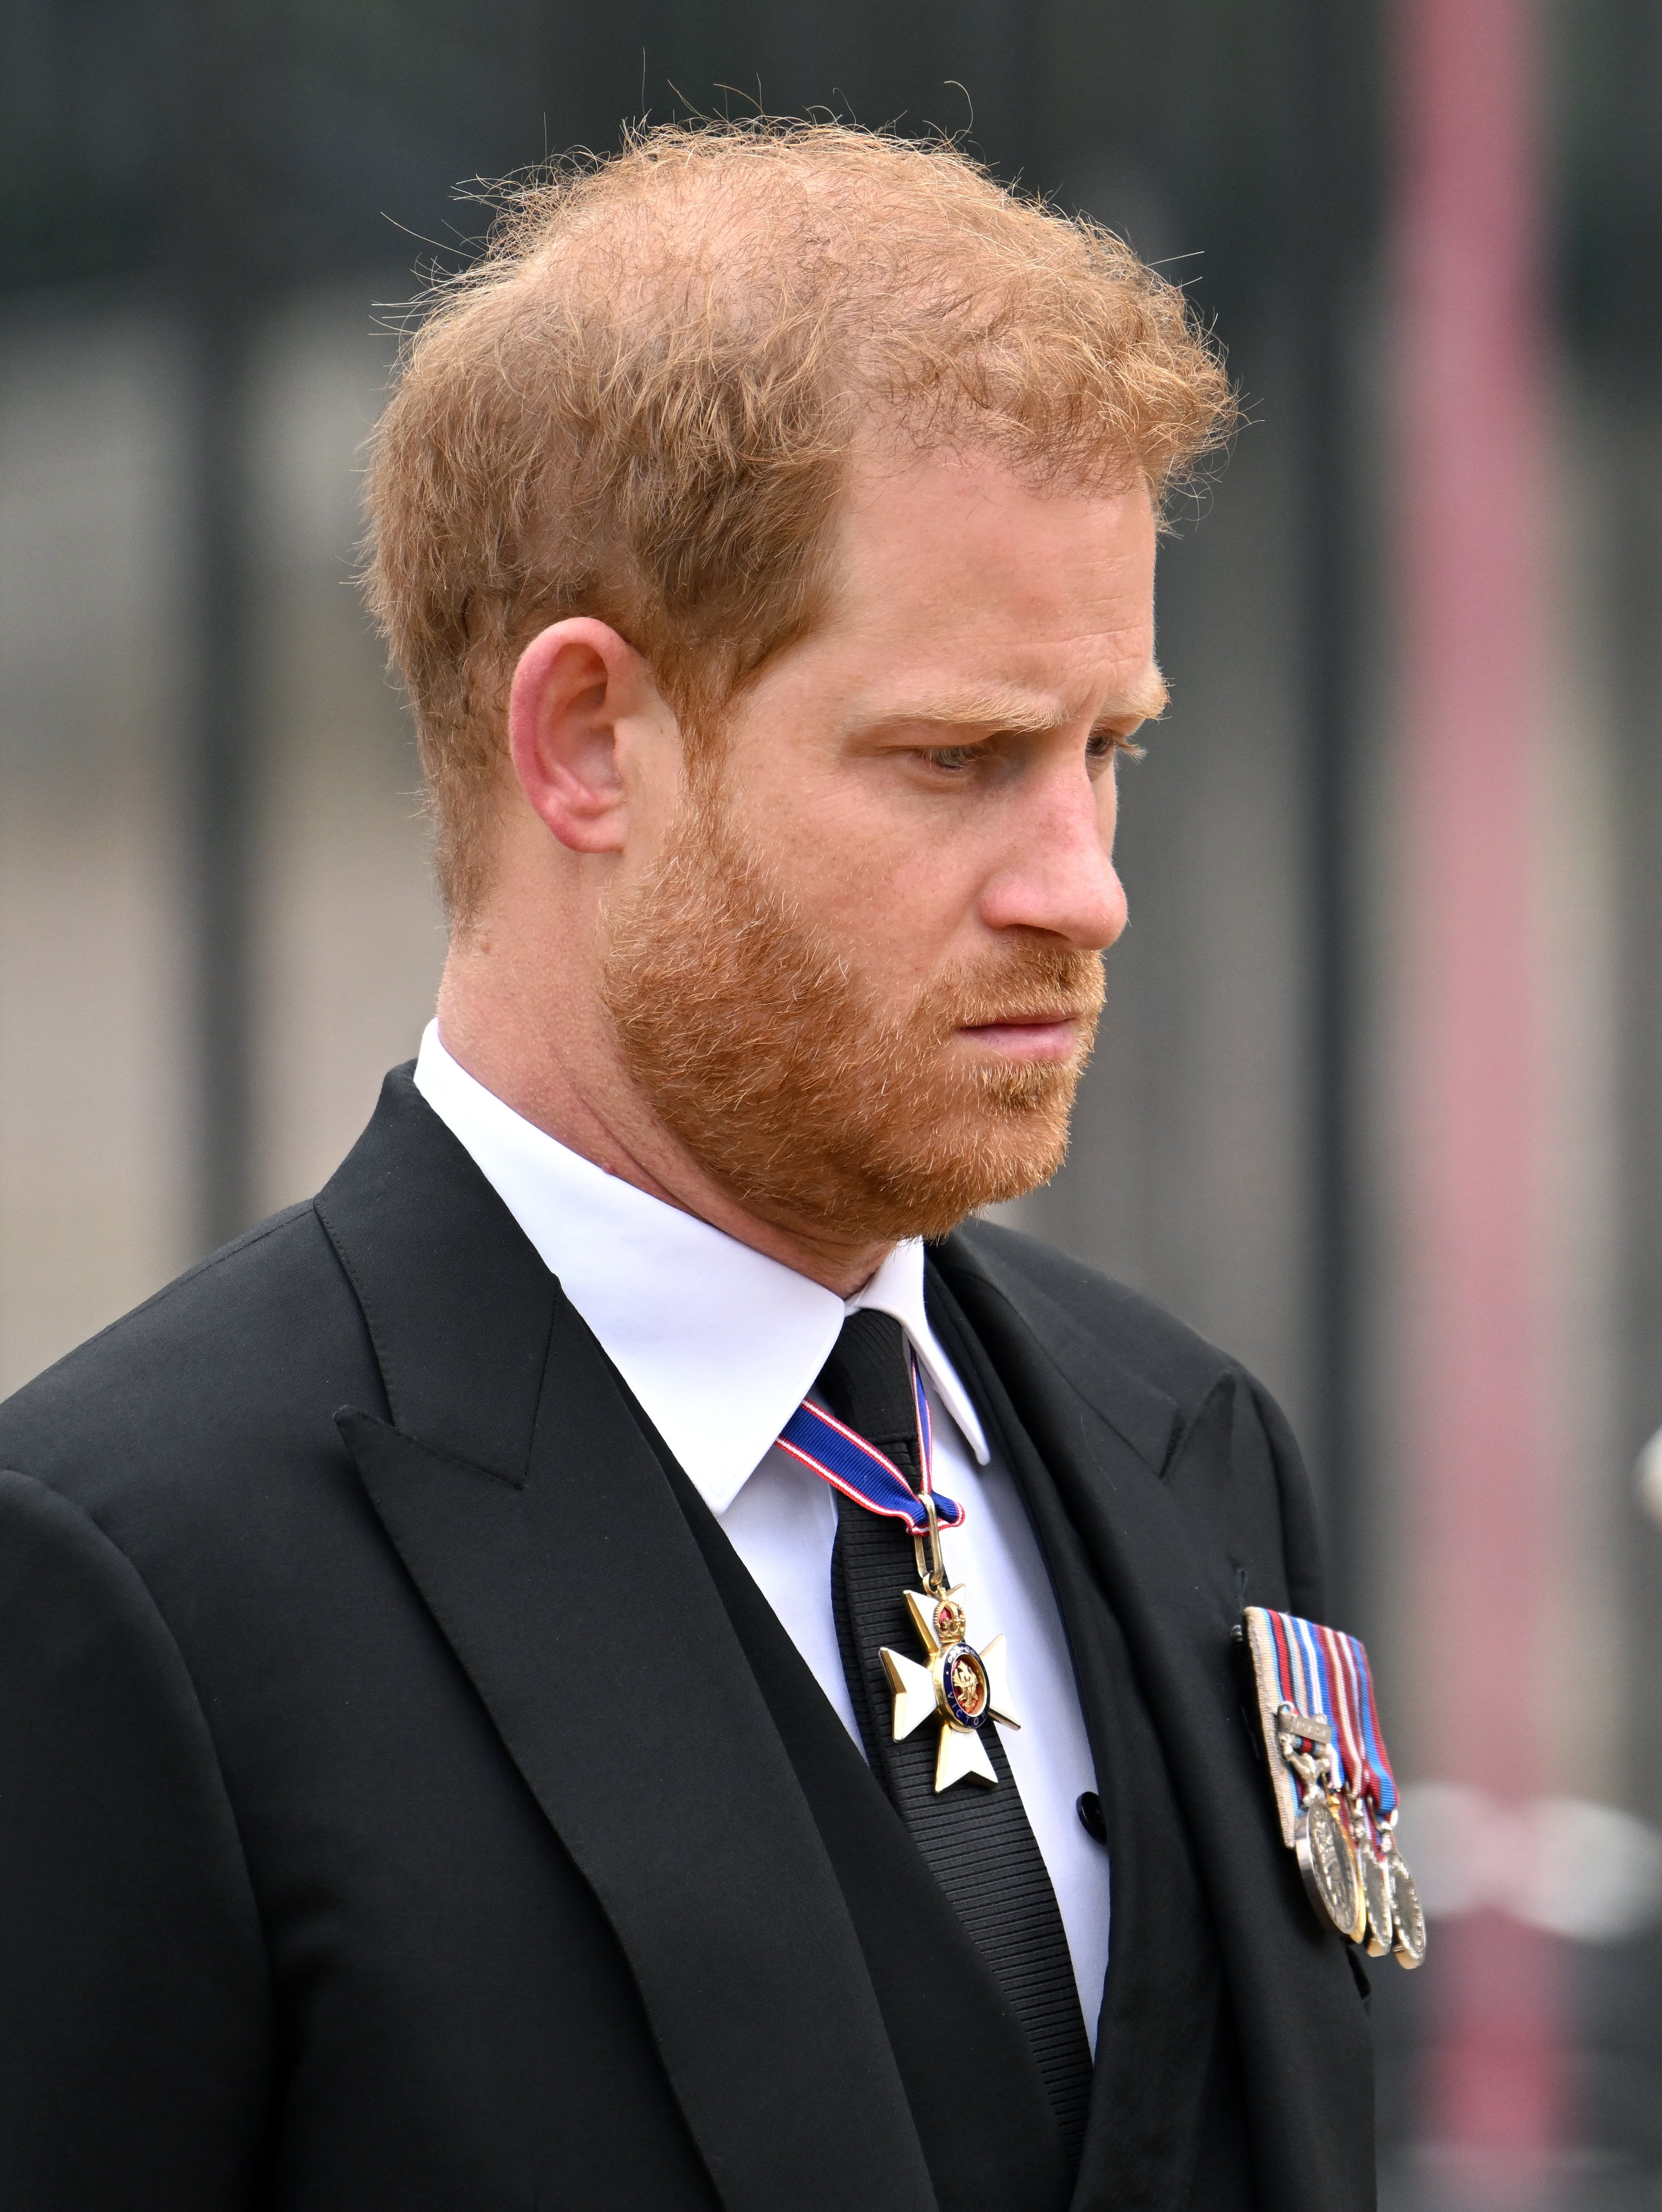 Prince Harry, Duke of Sussex at the State Funeral of Queen Elizabeth II at Westminster Abbey on September 19, 2022 in London, England. | Source: Getty Images